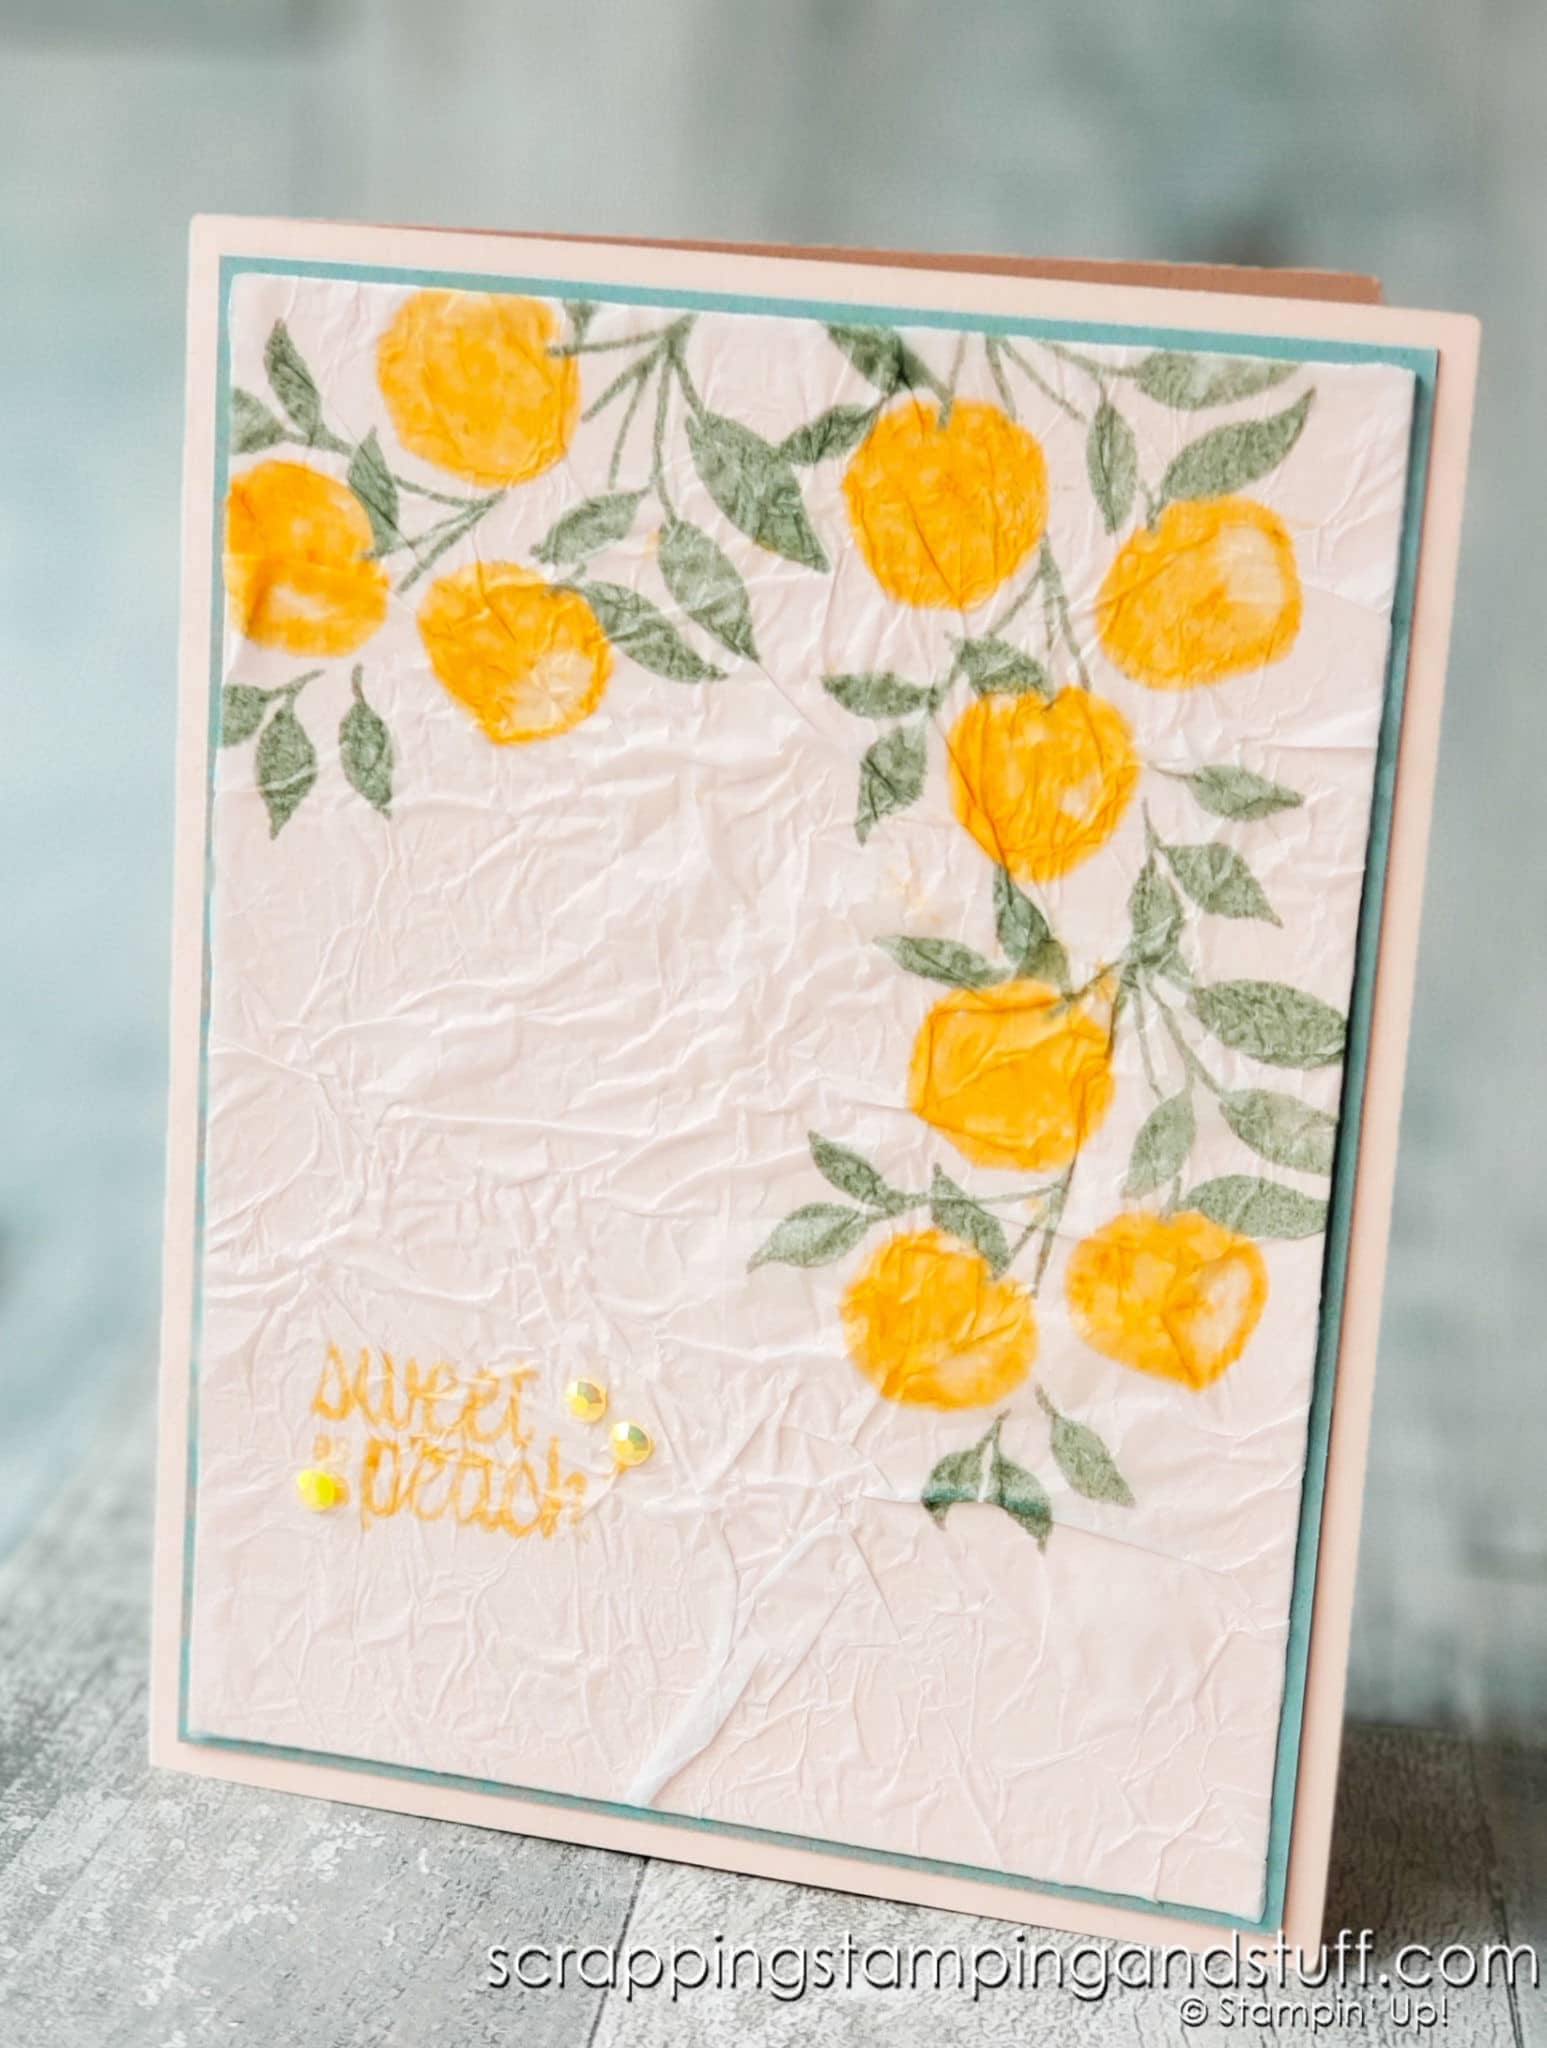 Tissue Stamping For Gorgeous Cards & Stampin Up Sweet As A Peach